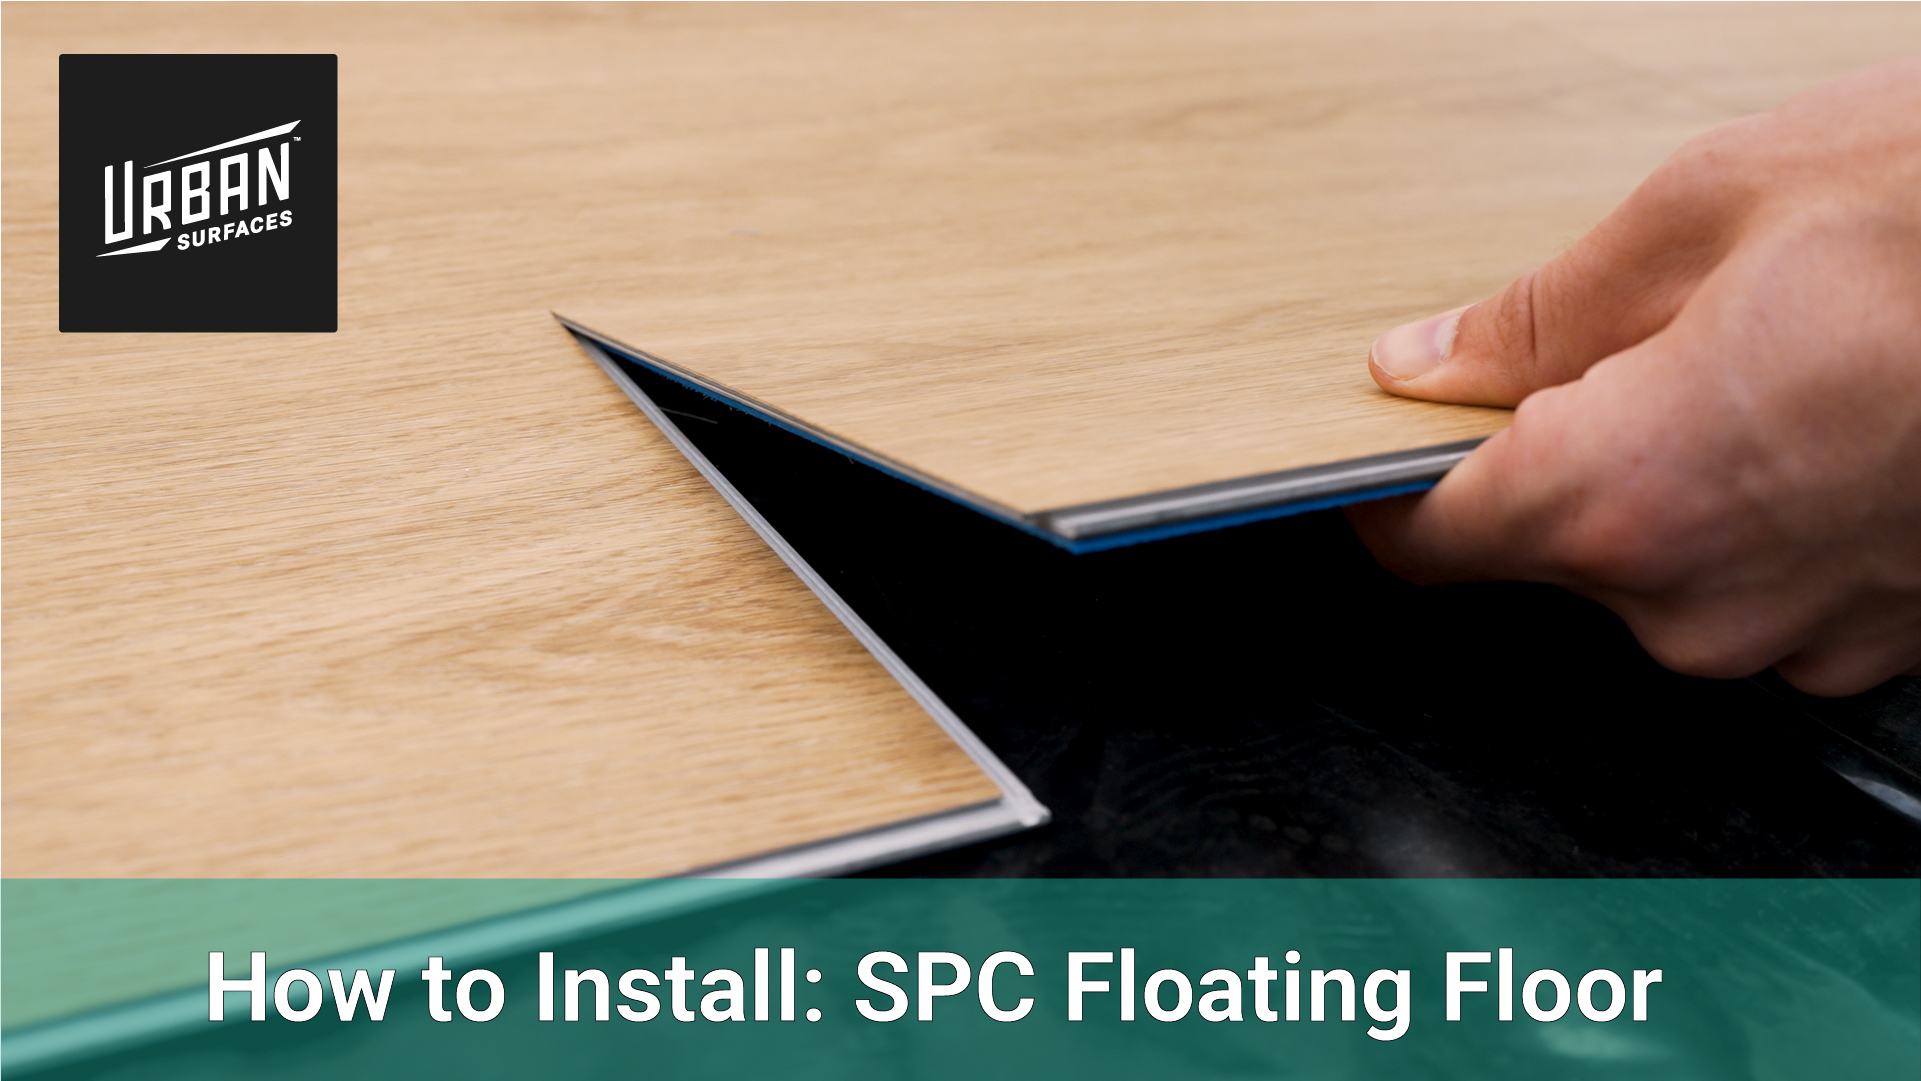 How To Install Our Spc Floating Floor Quickly And Correctly Urban Surfaces